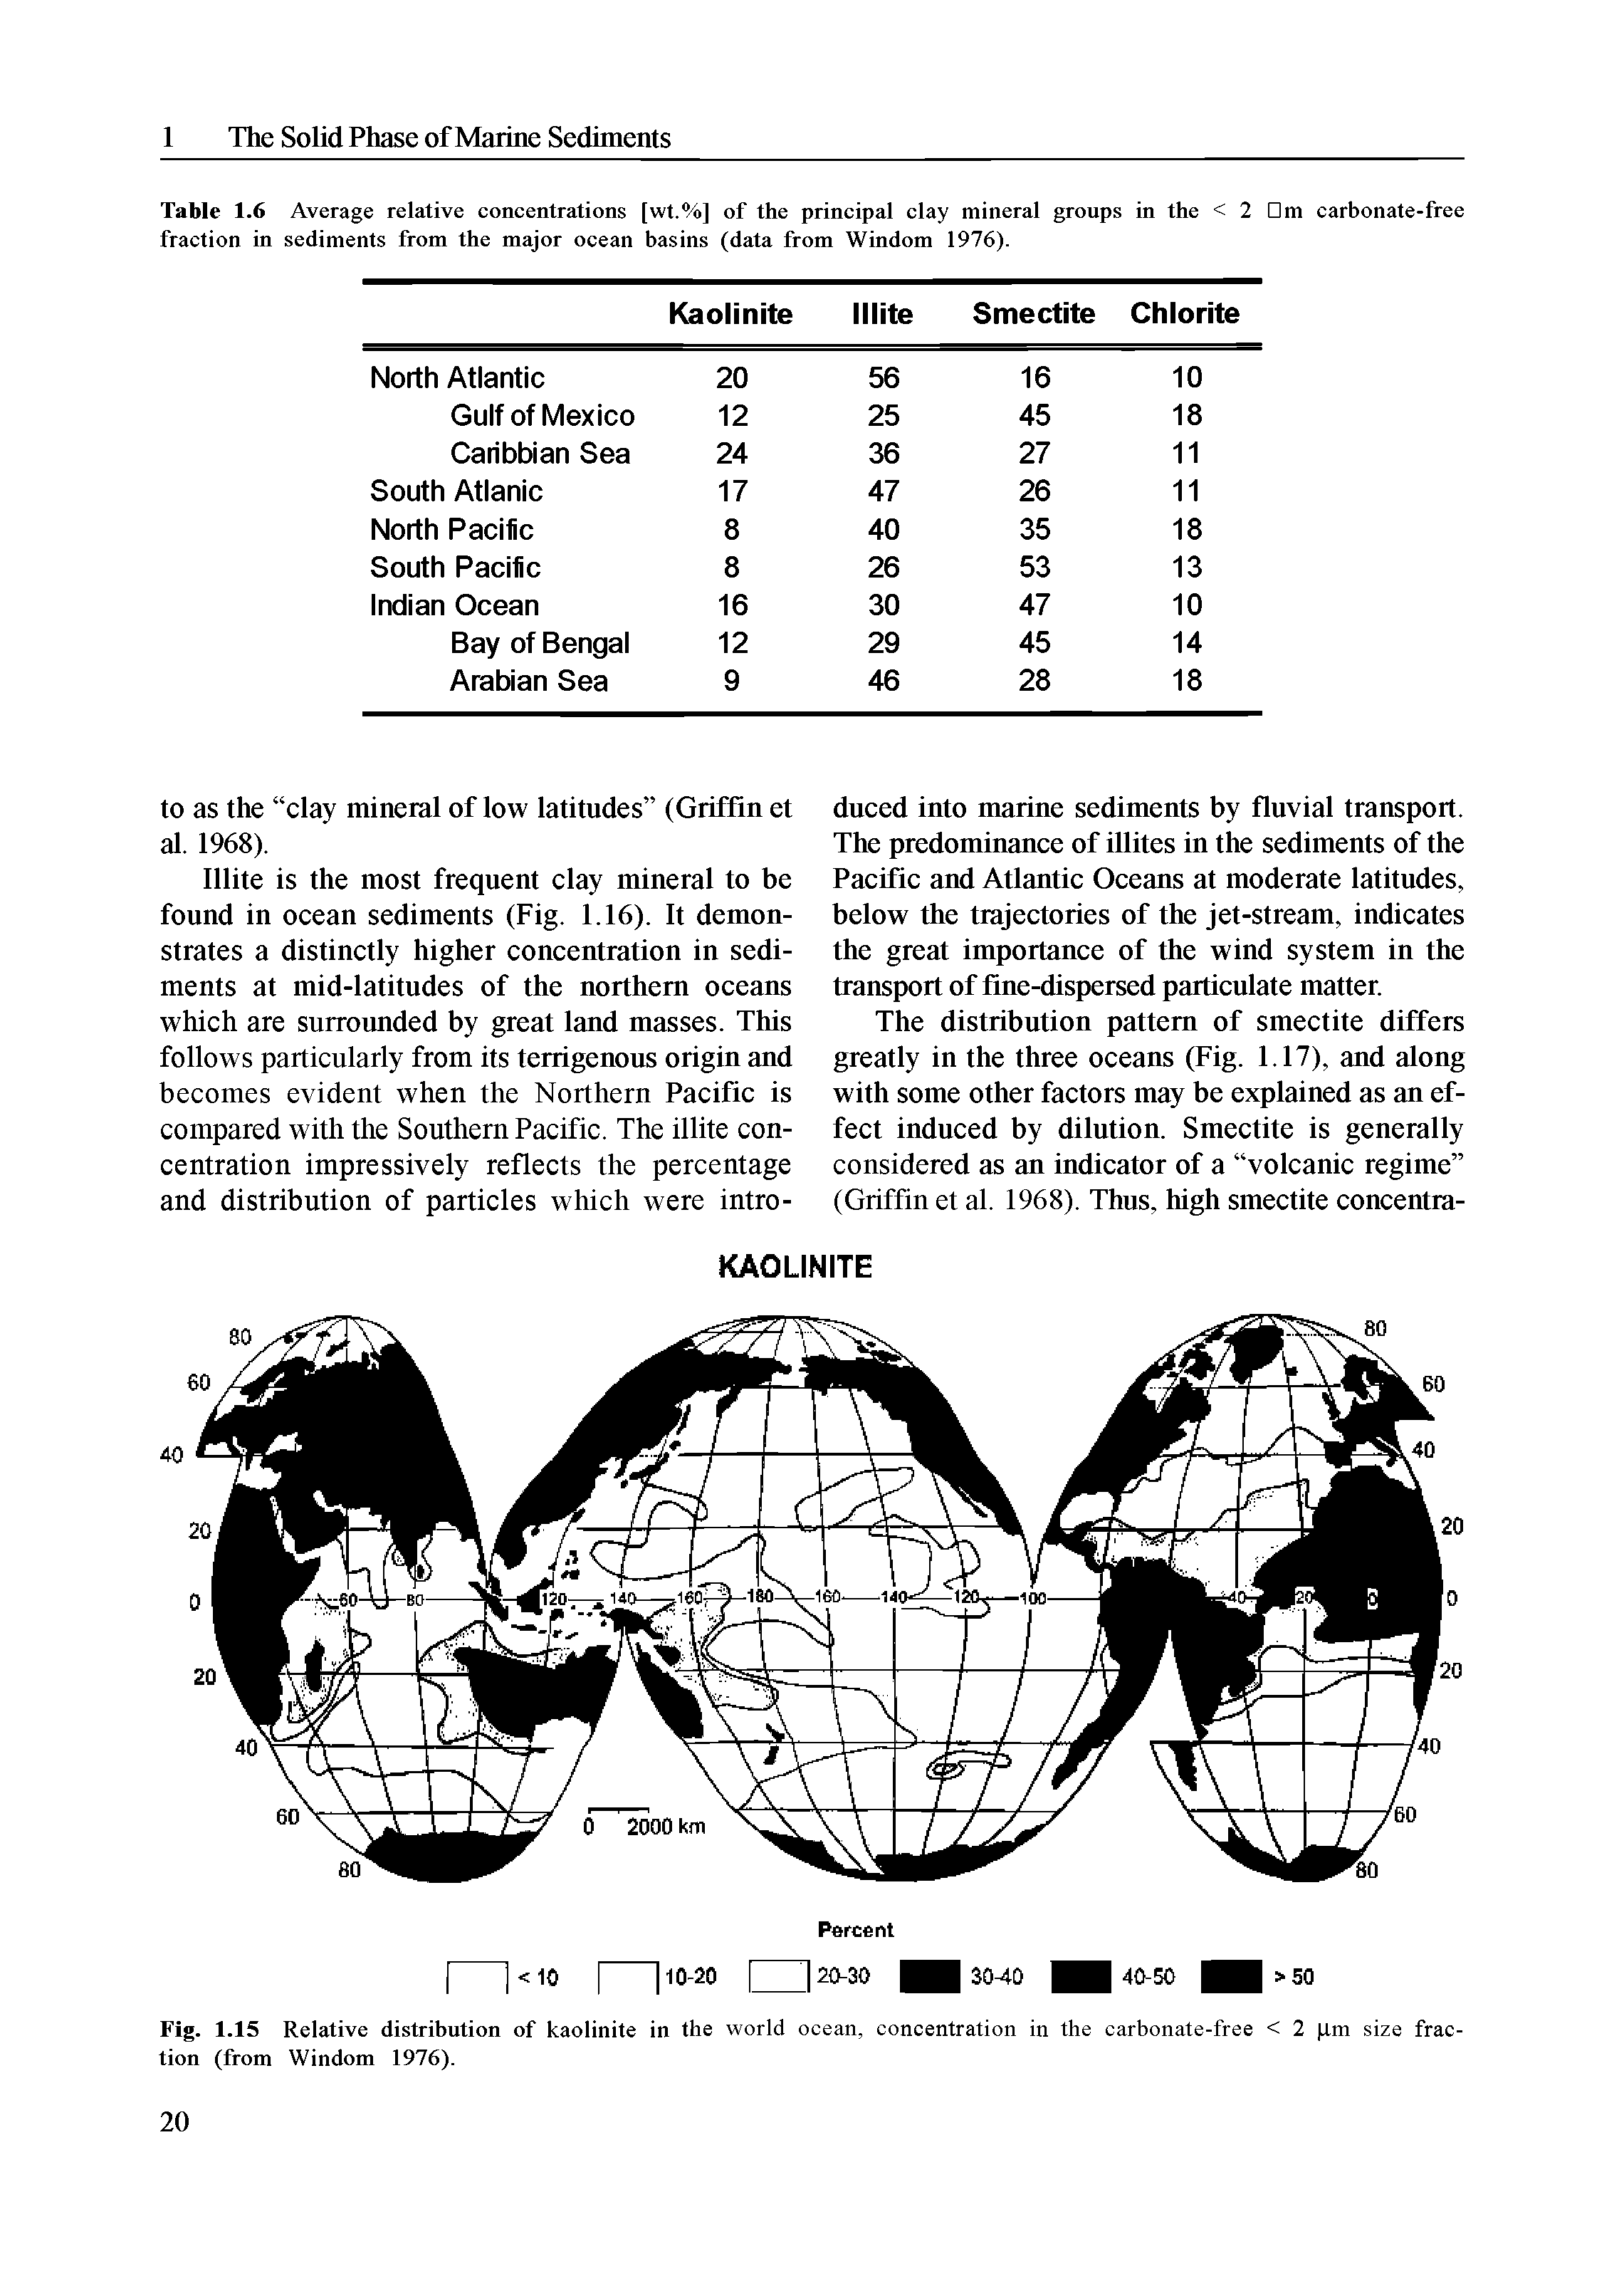 Table 1.6 Average relative concentrations [wt.%] of the principal clay mineral groups in the < 2 Dm carbonate-free fraction in sediments from the major ocean basins (data from Windom 1976).